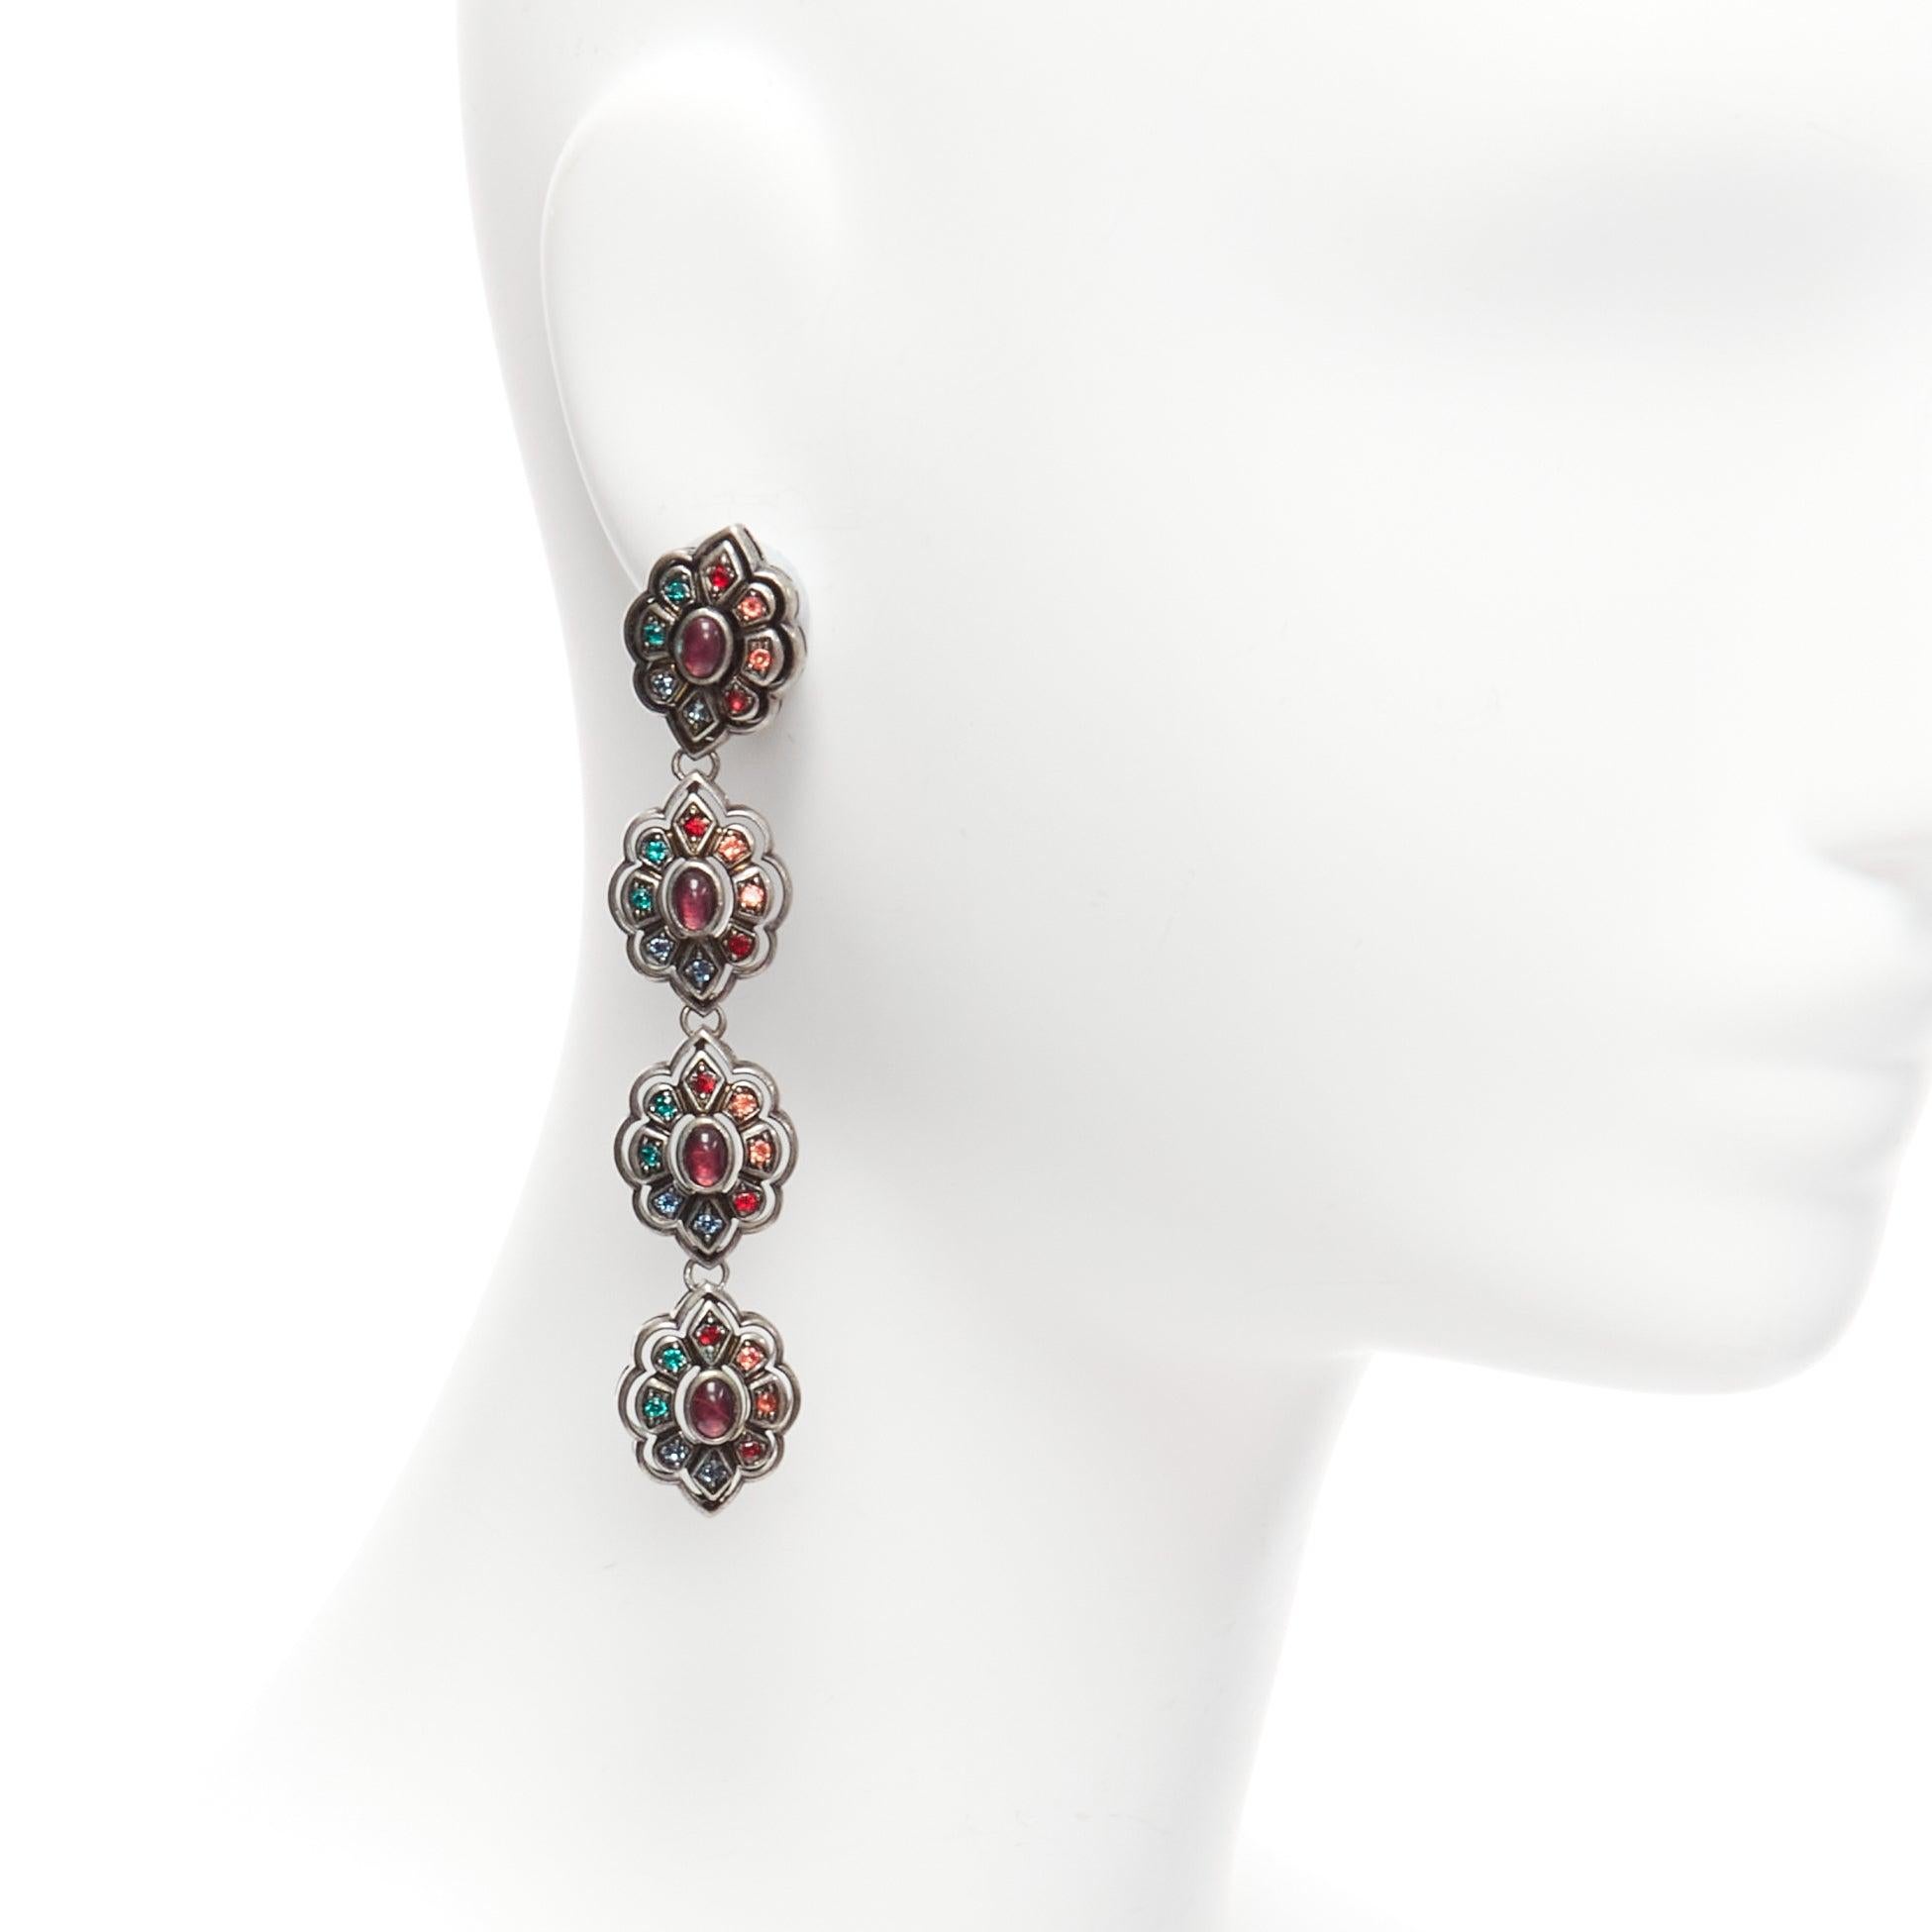 GUCCI Alessandro Michele colourful crystal barocco floral drop earrings Pair
Reference: BSHW/A00116
Brand: Gucci
Designer: Alessandro Michele
Material: Metal
Color: Bronze, Multicolour
Pattern: Solid
Closure: Clip On
Lining: Bronze Metal
Extra